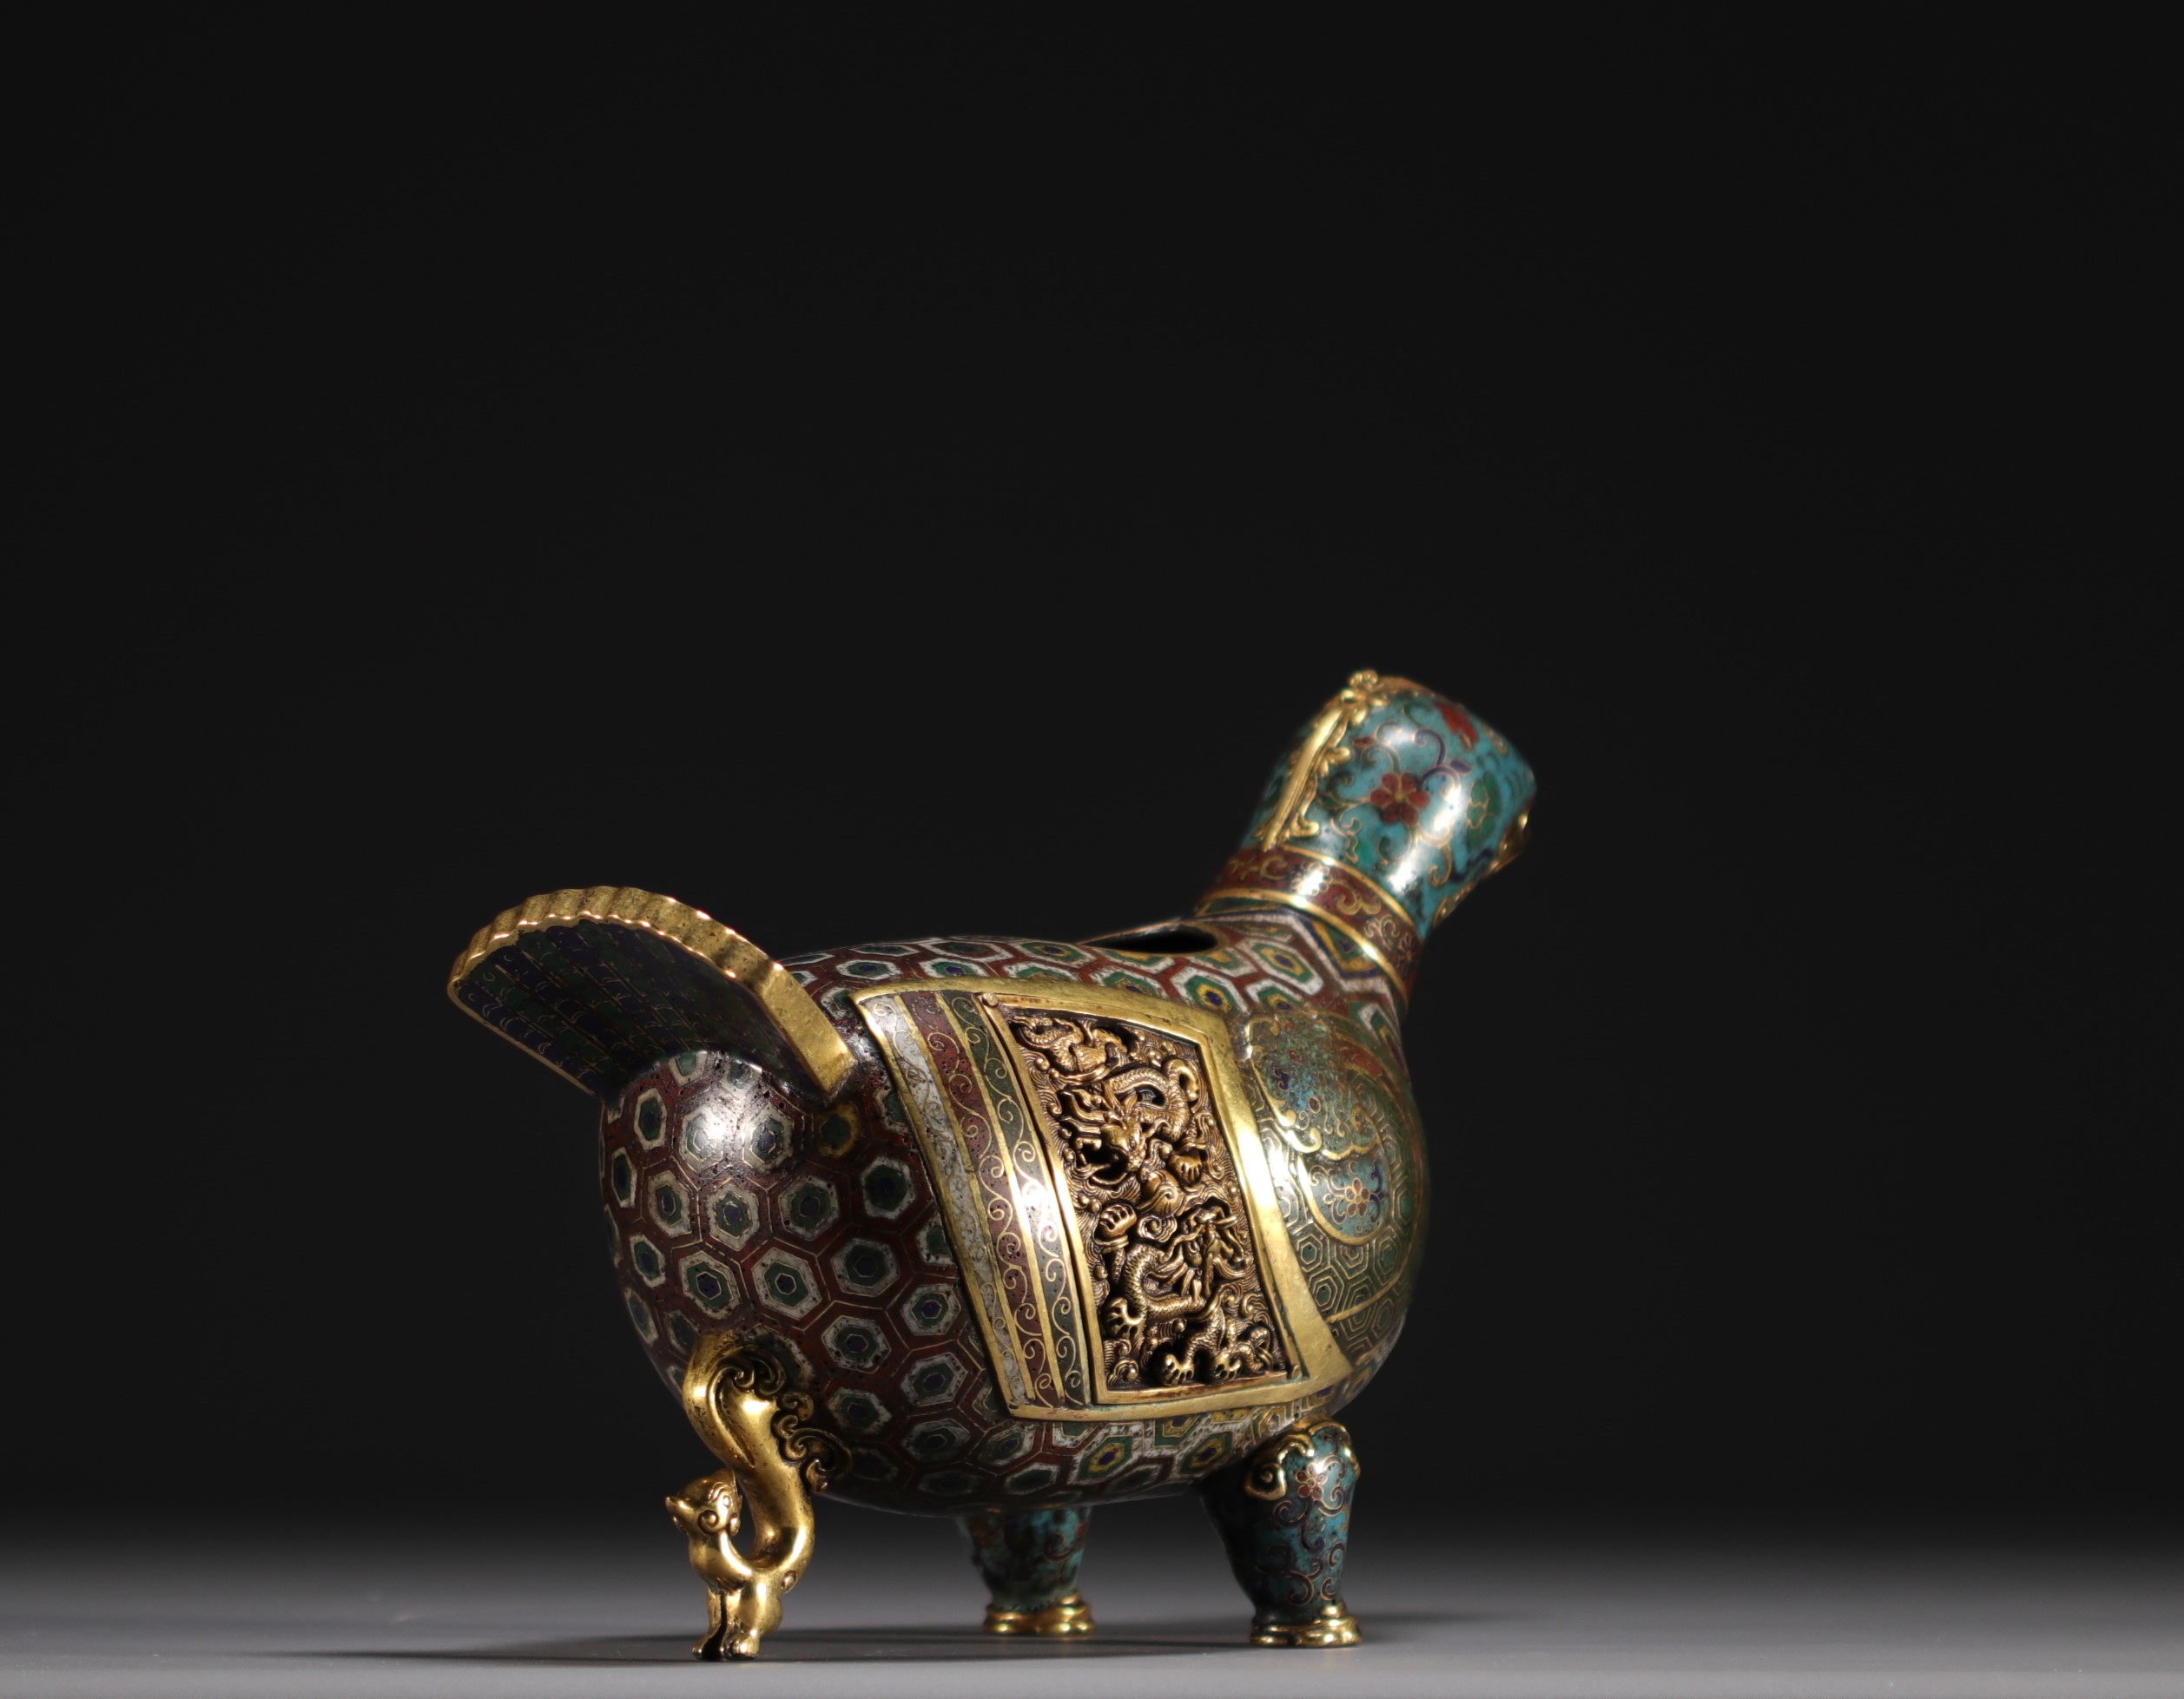 China - Bird-shaped cloisonne bronze perfume burner decorated with dragons, 18th century. - Image 4 of 7